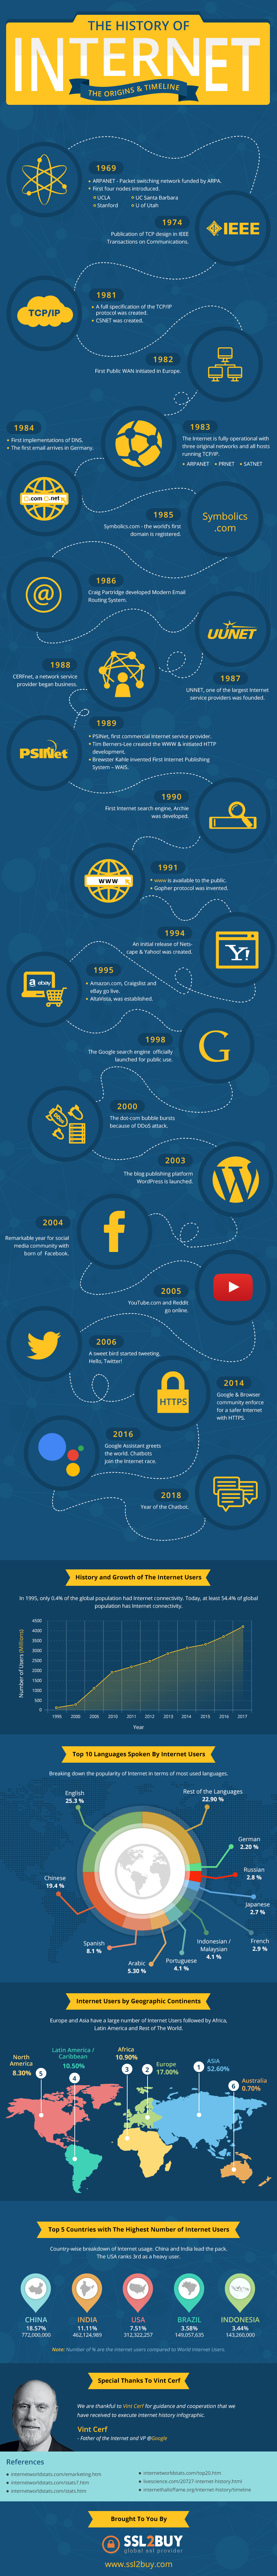 Brief History of the Internet – Journey of Life-Changing Digital World